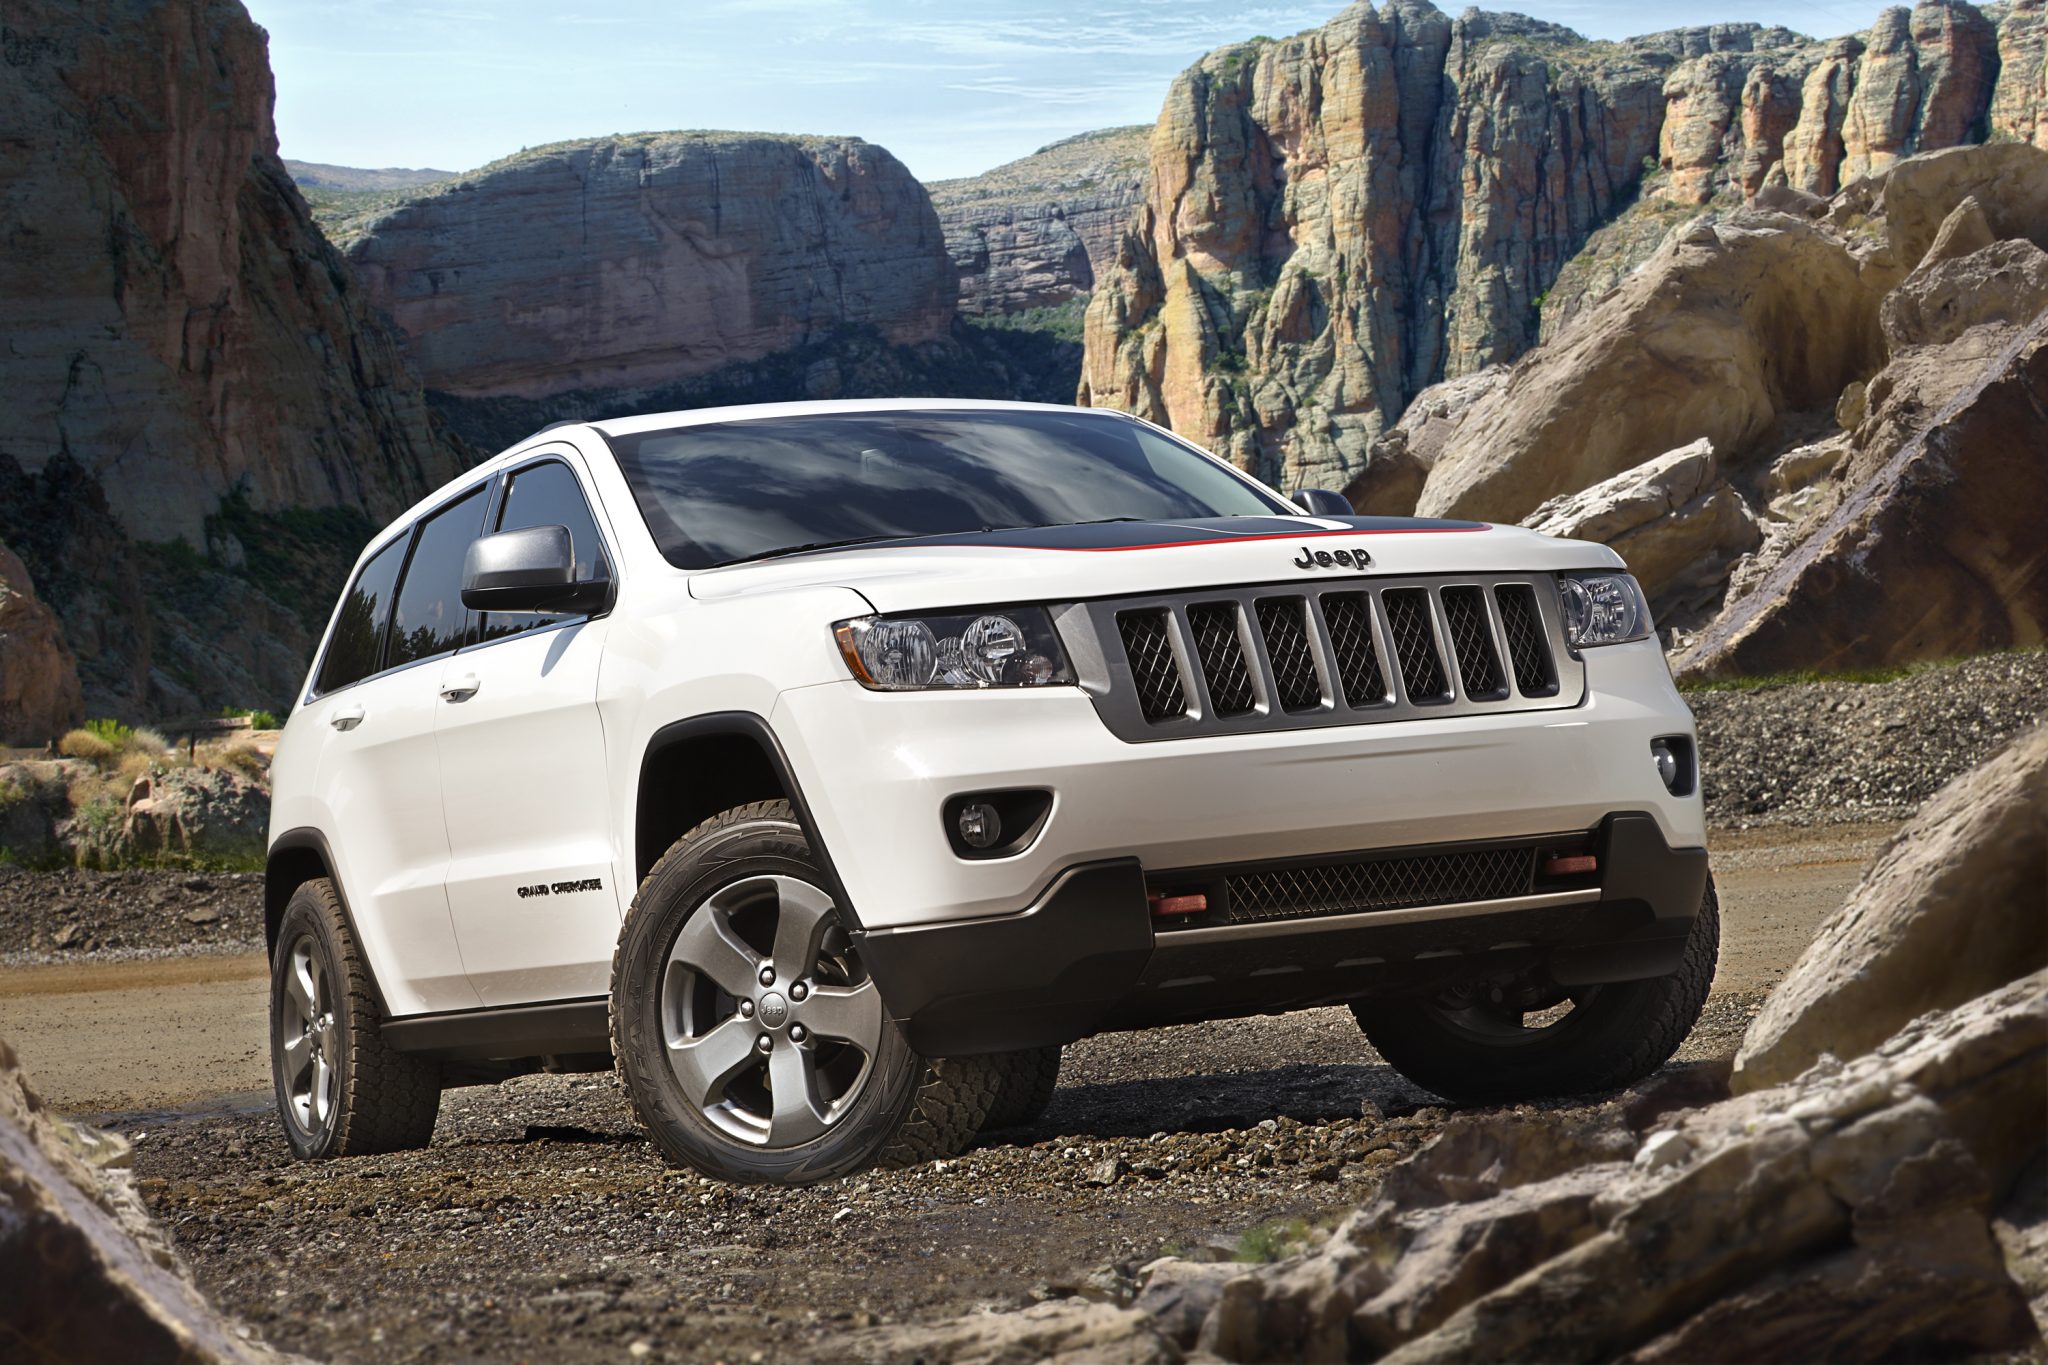 2013 Jeep Grand Cherokee Overview The News Wheel